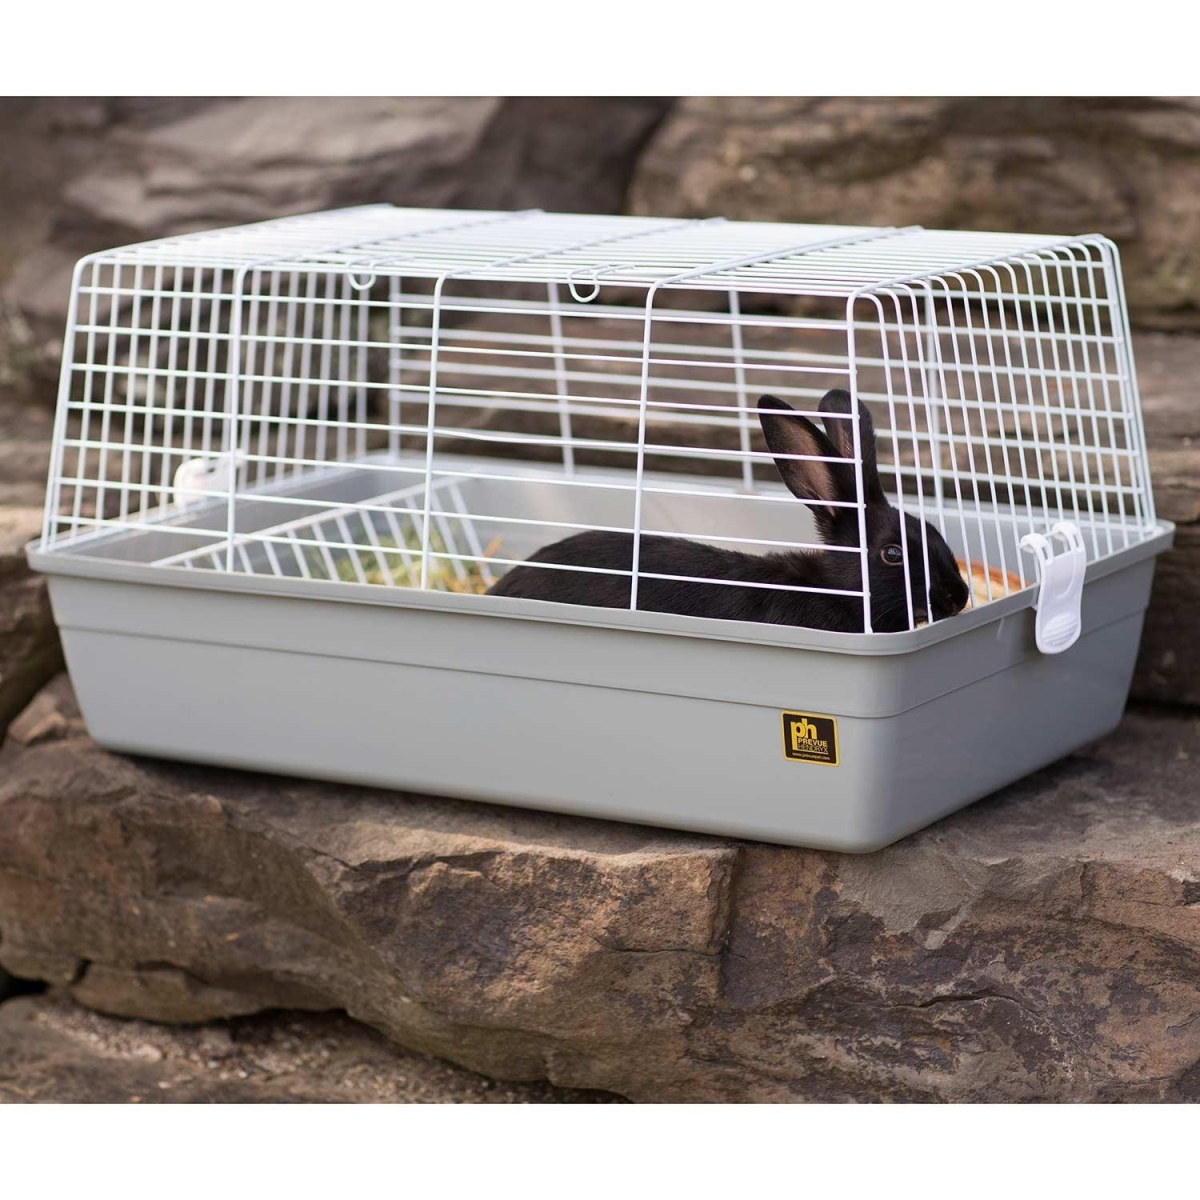 Picture of Prevue Pet Products PP-SP527G Bella Small Animal Cage - Gray